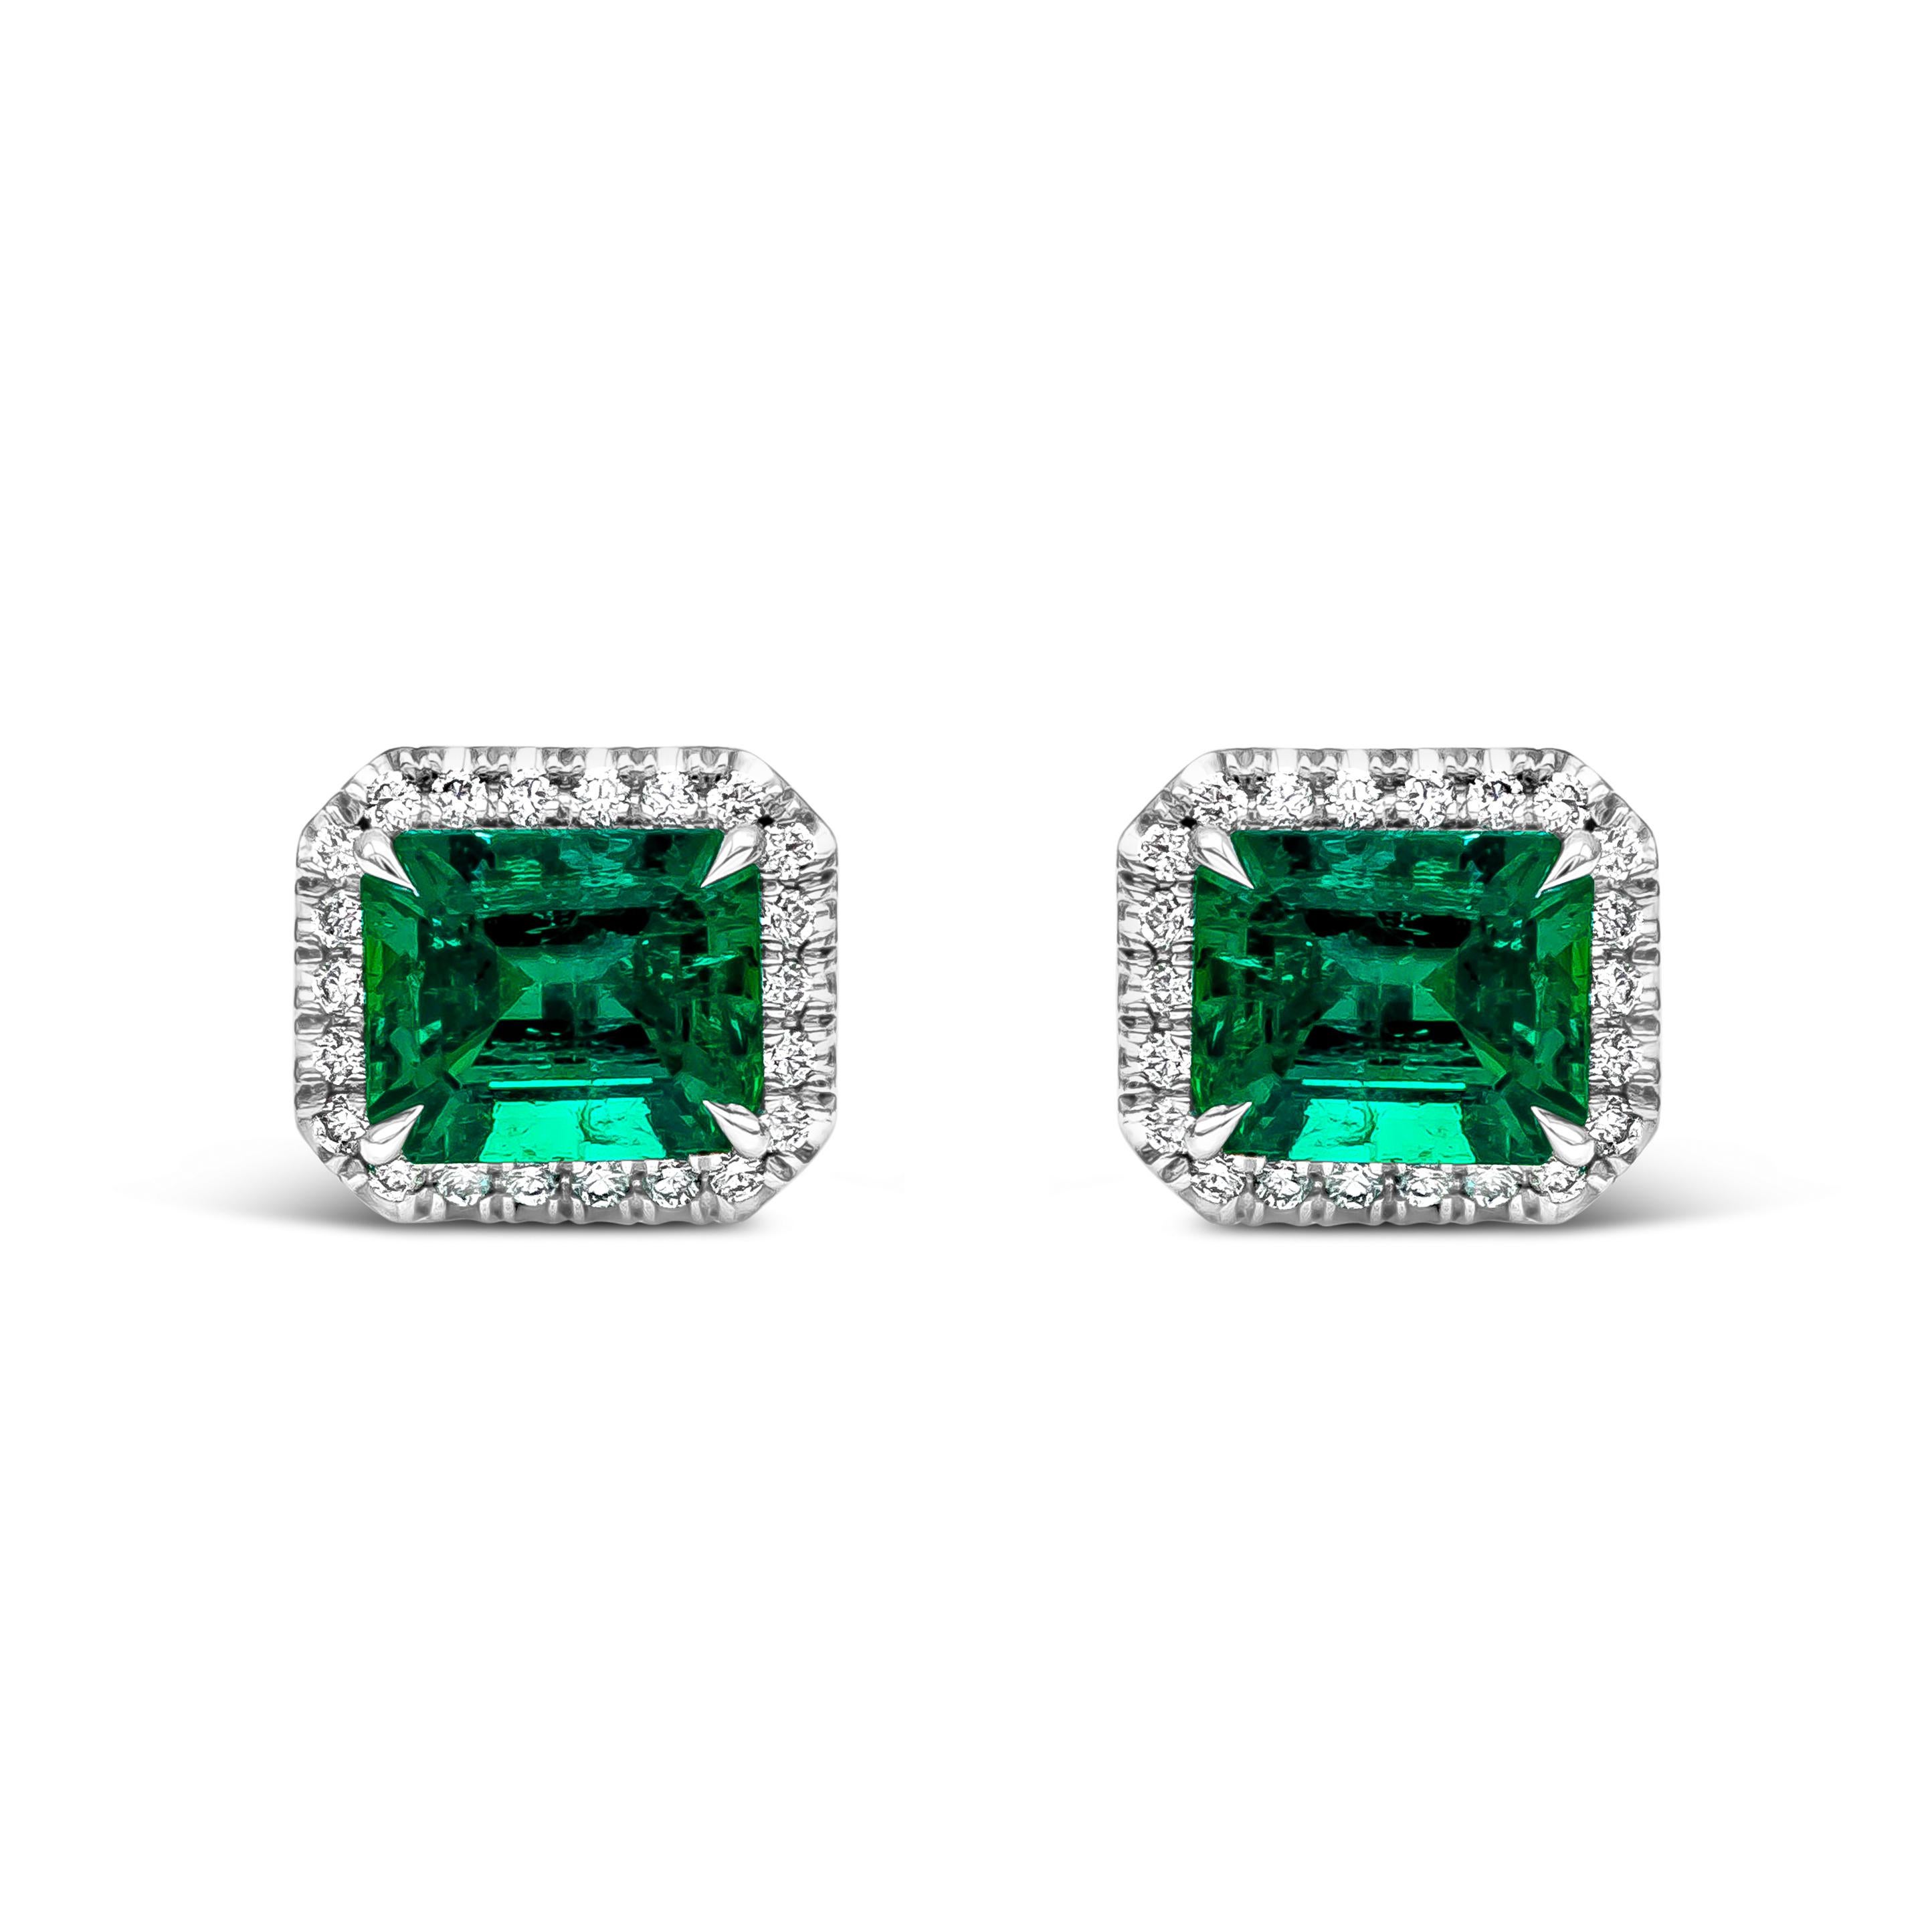 This elegant pair of stud earrings showcases two emerald cut Colombian Muzo Emerald weighing a total of 2.41 carats. Each emerald is surrounded by a row of brilliant round diamonds weighing 0.19 carats total, F Color  and VS in Clarity. Made with